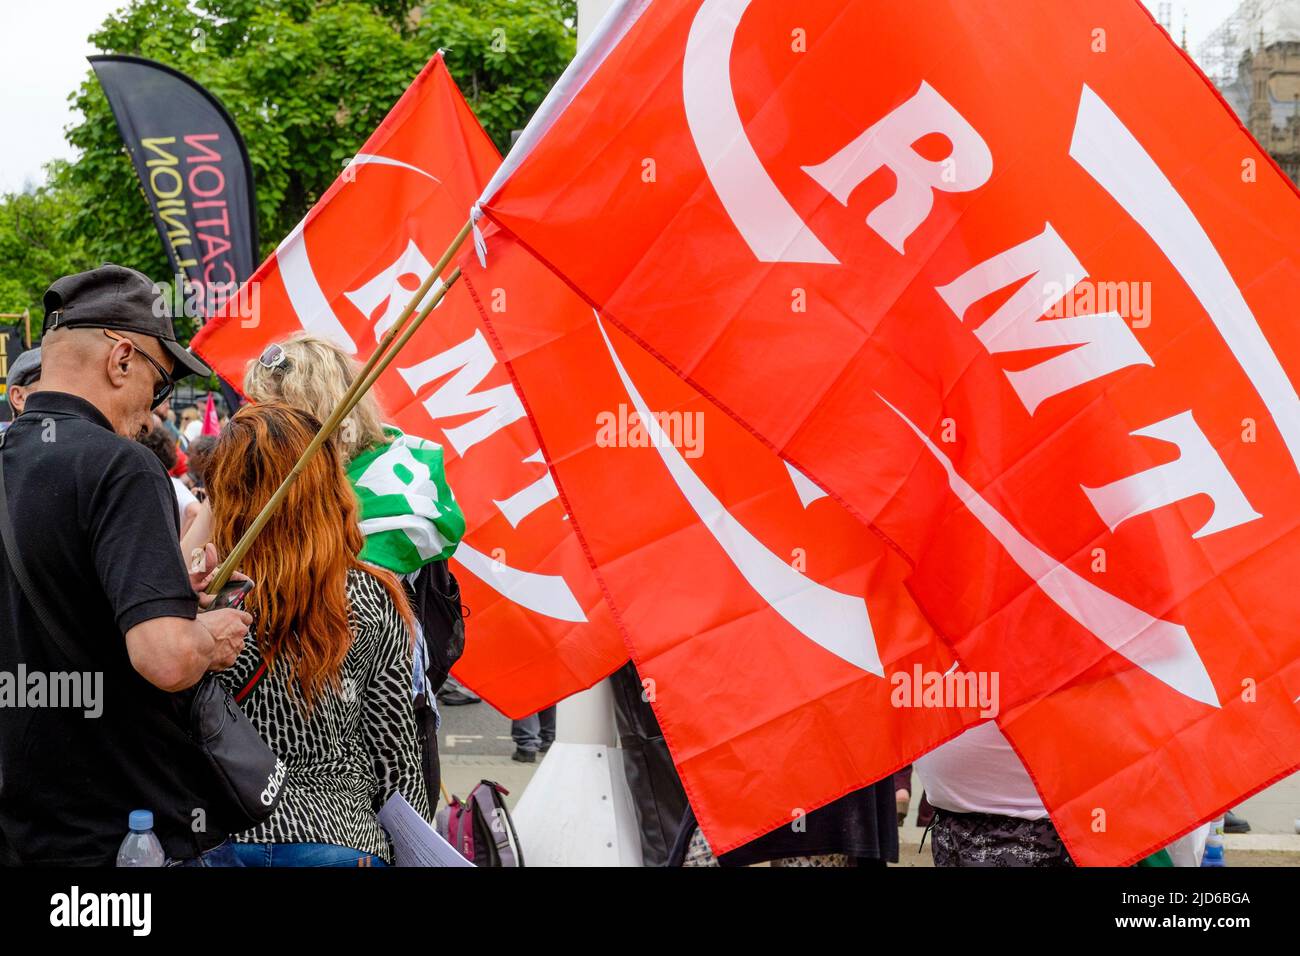 London UK, 18th May 2022. Members of the Rail, Maritime and Transport Workers union join thousands of trade union members on the We Demand Better march organised by the TUC against the UK government and the cost of living crisis. Stock Photo